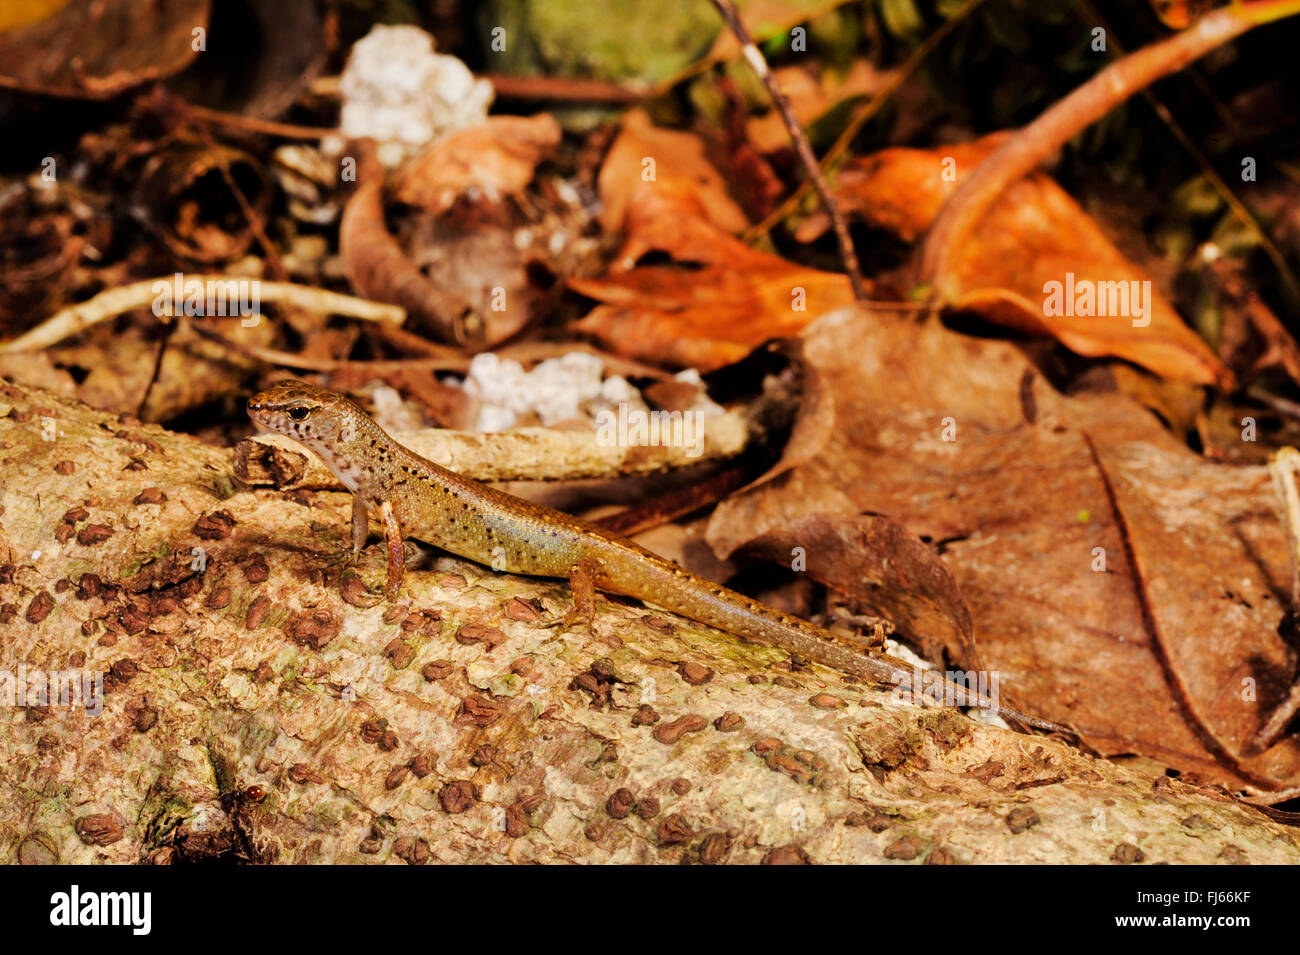 Northern Pale-hipped Skink (Celatiscincus similis), on a tree root, New Caledonia, Ile des Pins Stock Photo